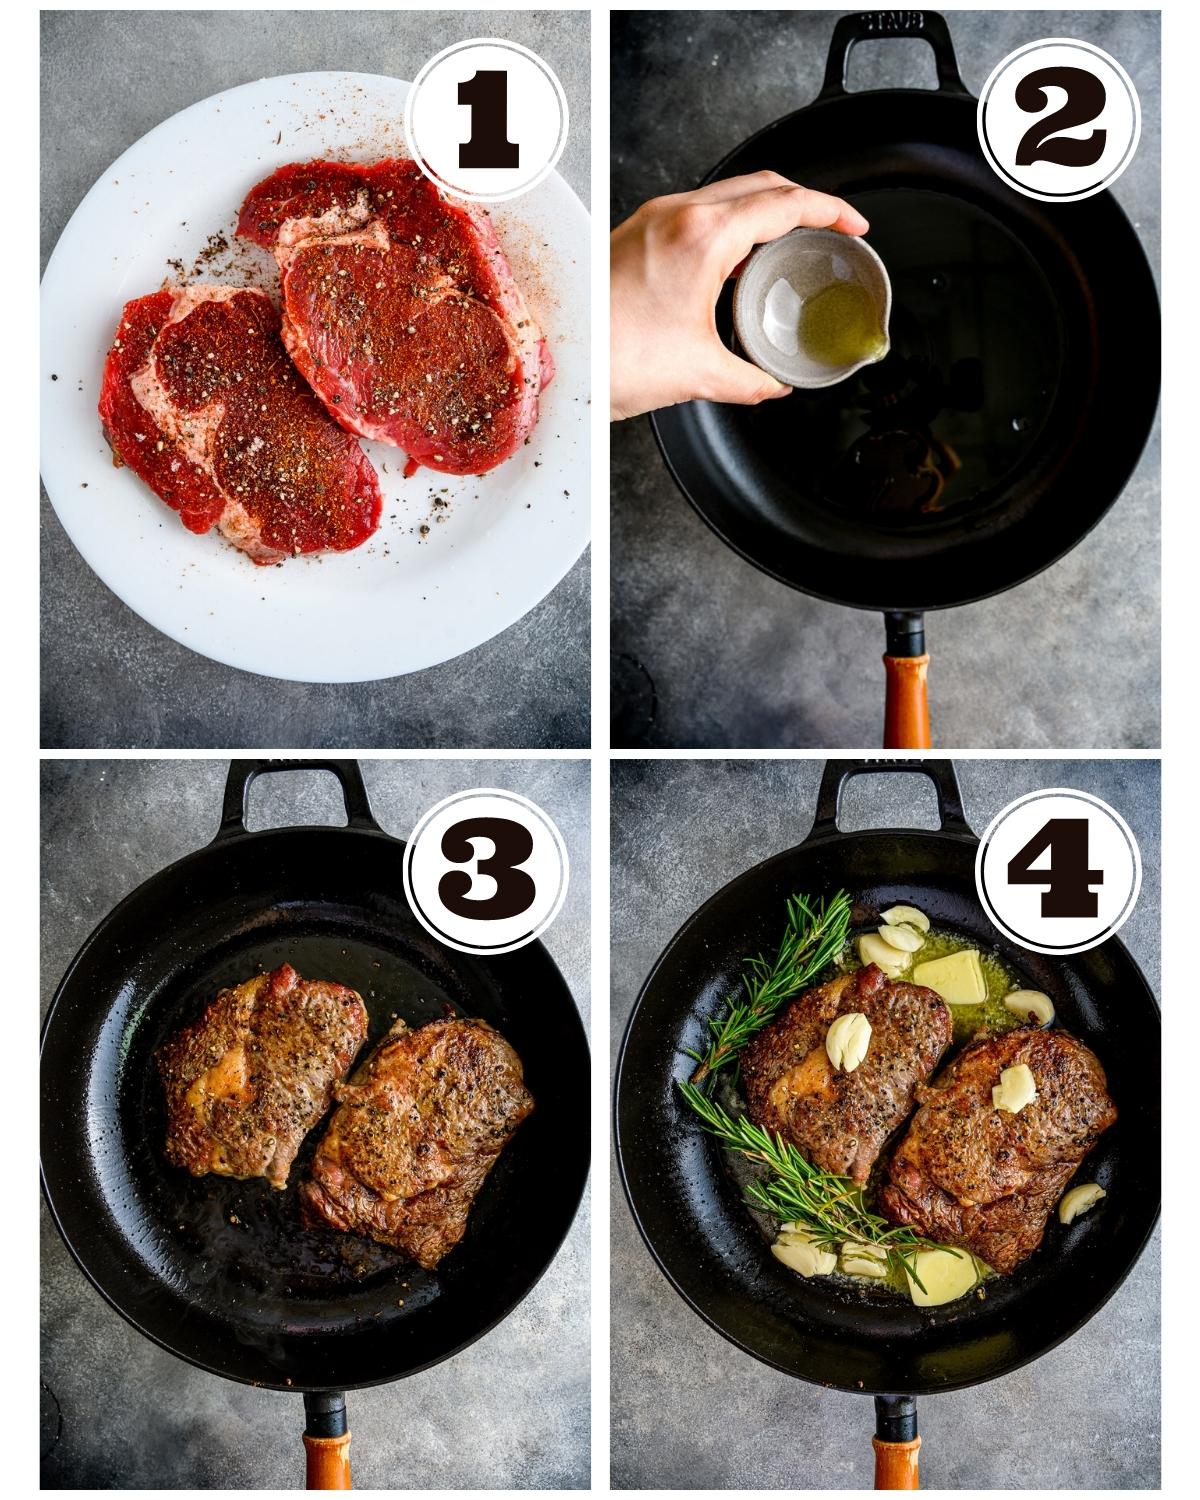 steps to make a ribeye steak in a cast iron skillet